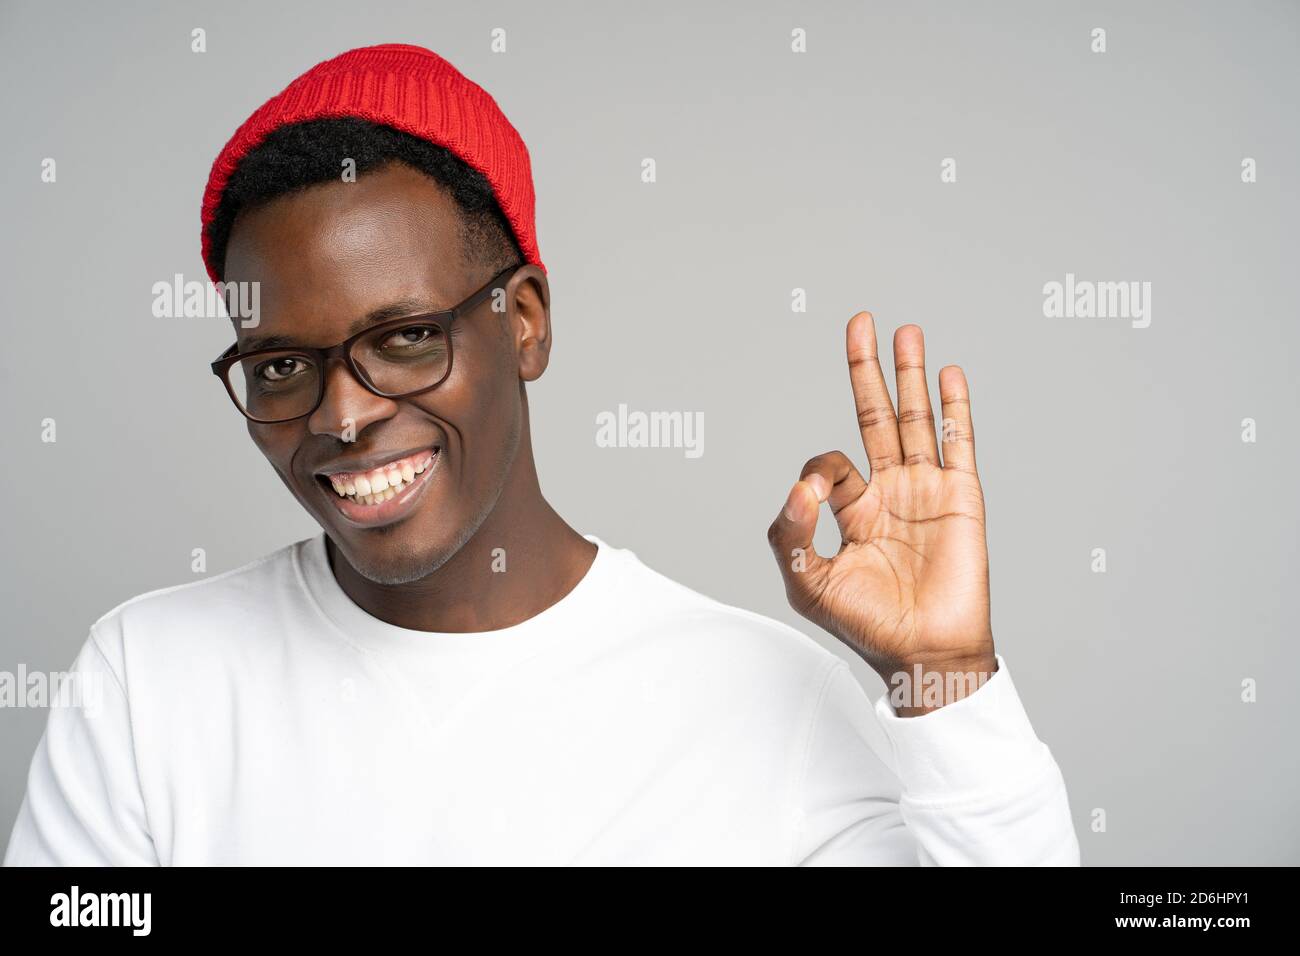 Cheerful playful young Afro American man wear red hat in good mood smiling broadly, showing okay gesture over studio grey background. Positive Black m Stock Photo